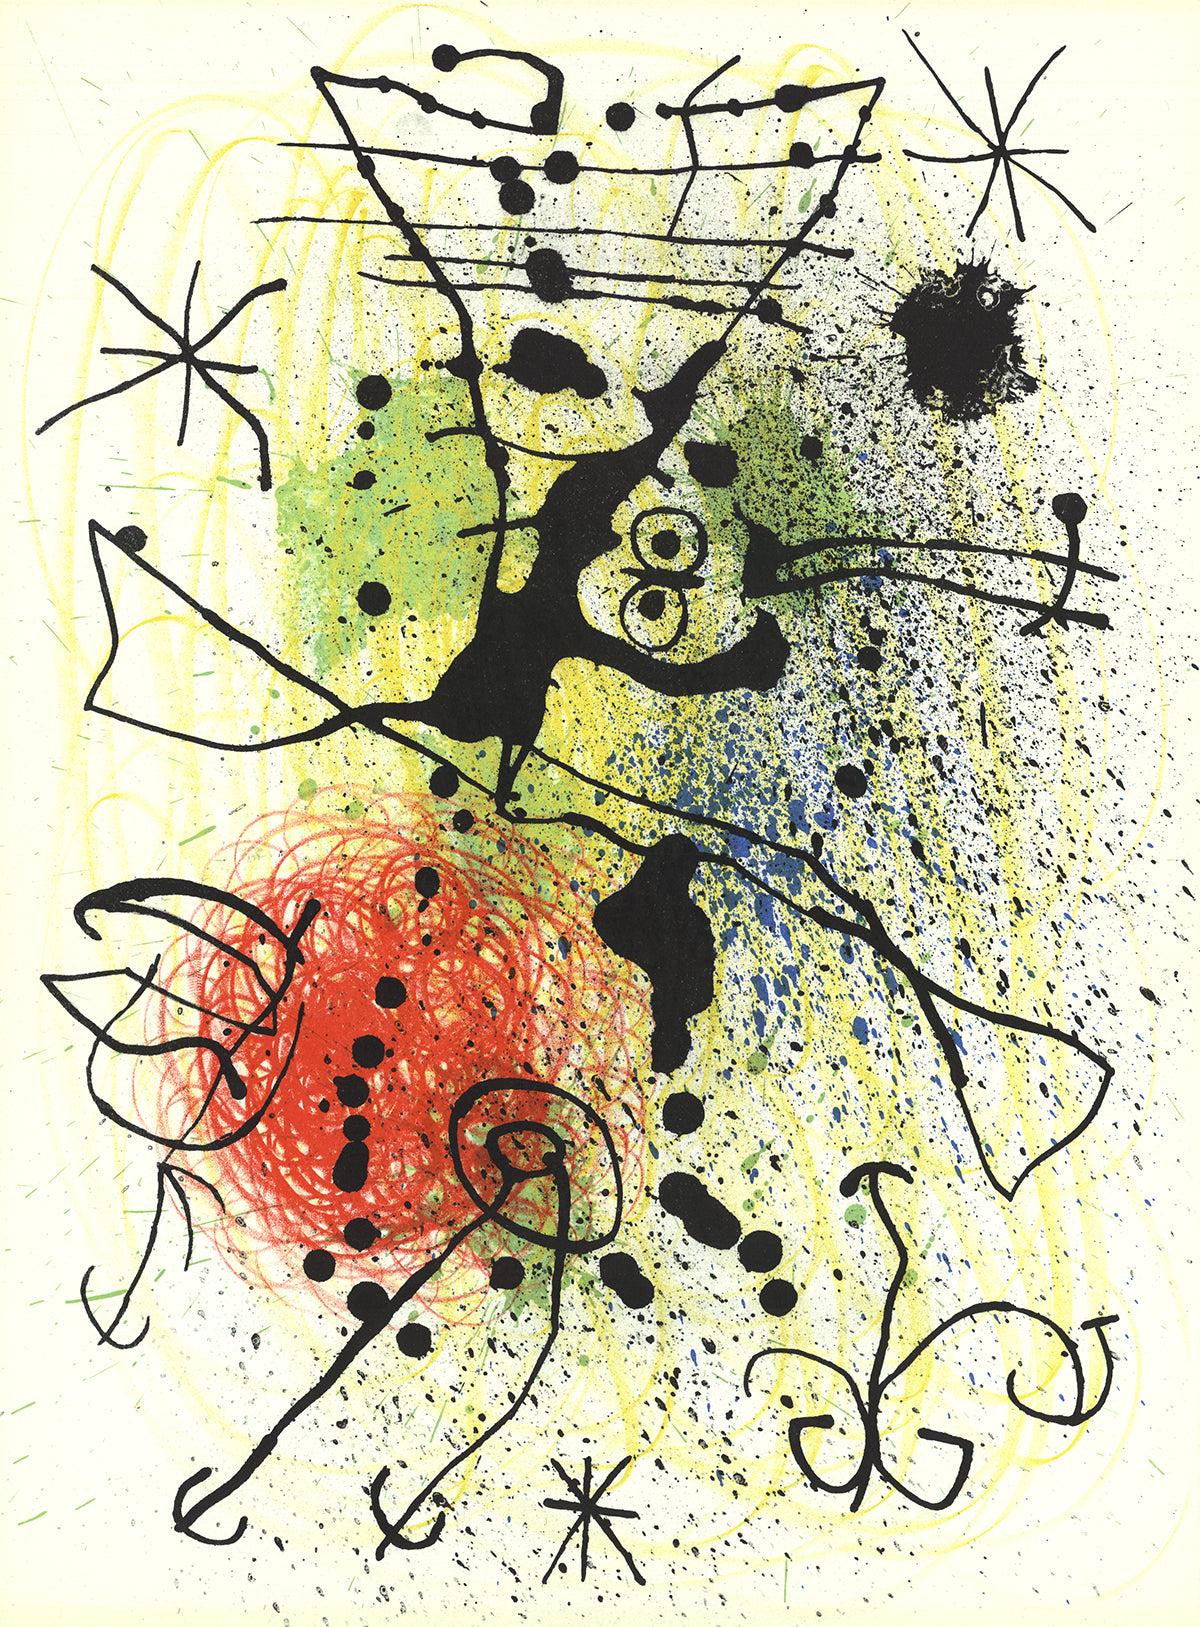 Joan Miro 'Line and Splatter Composition' 1965- Lithograph - Print by Joan Miró